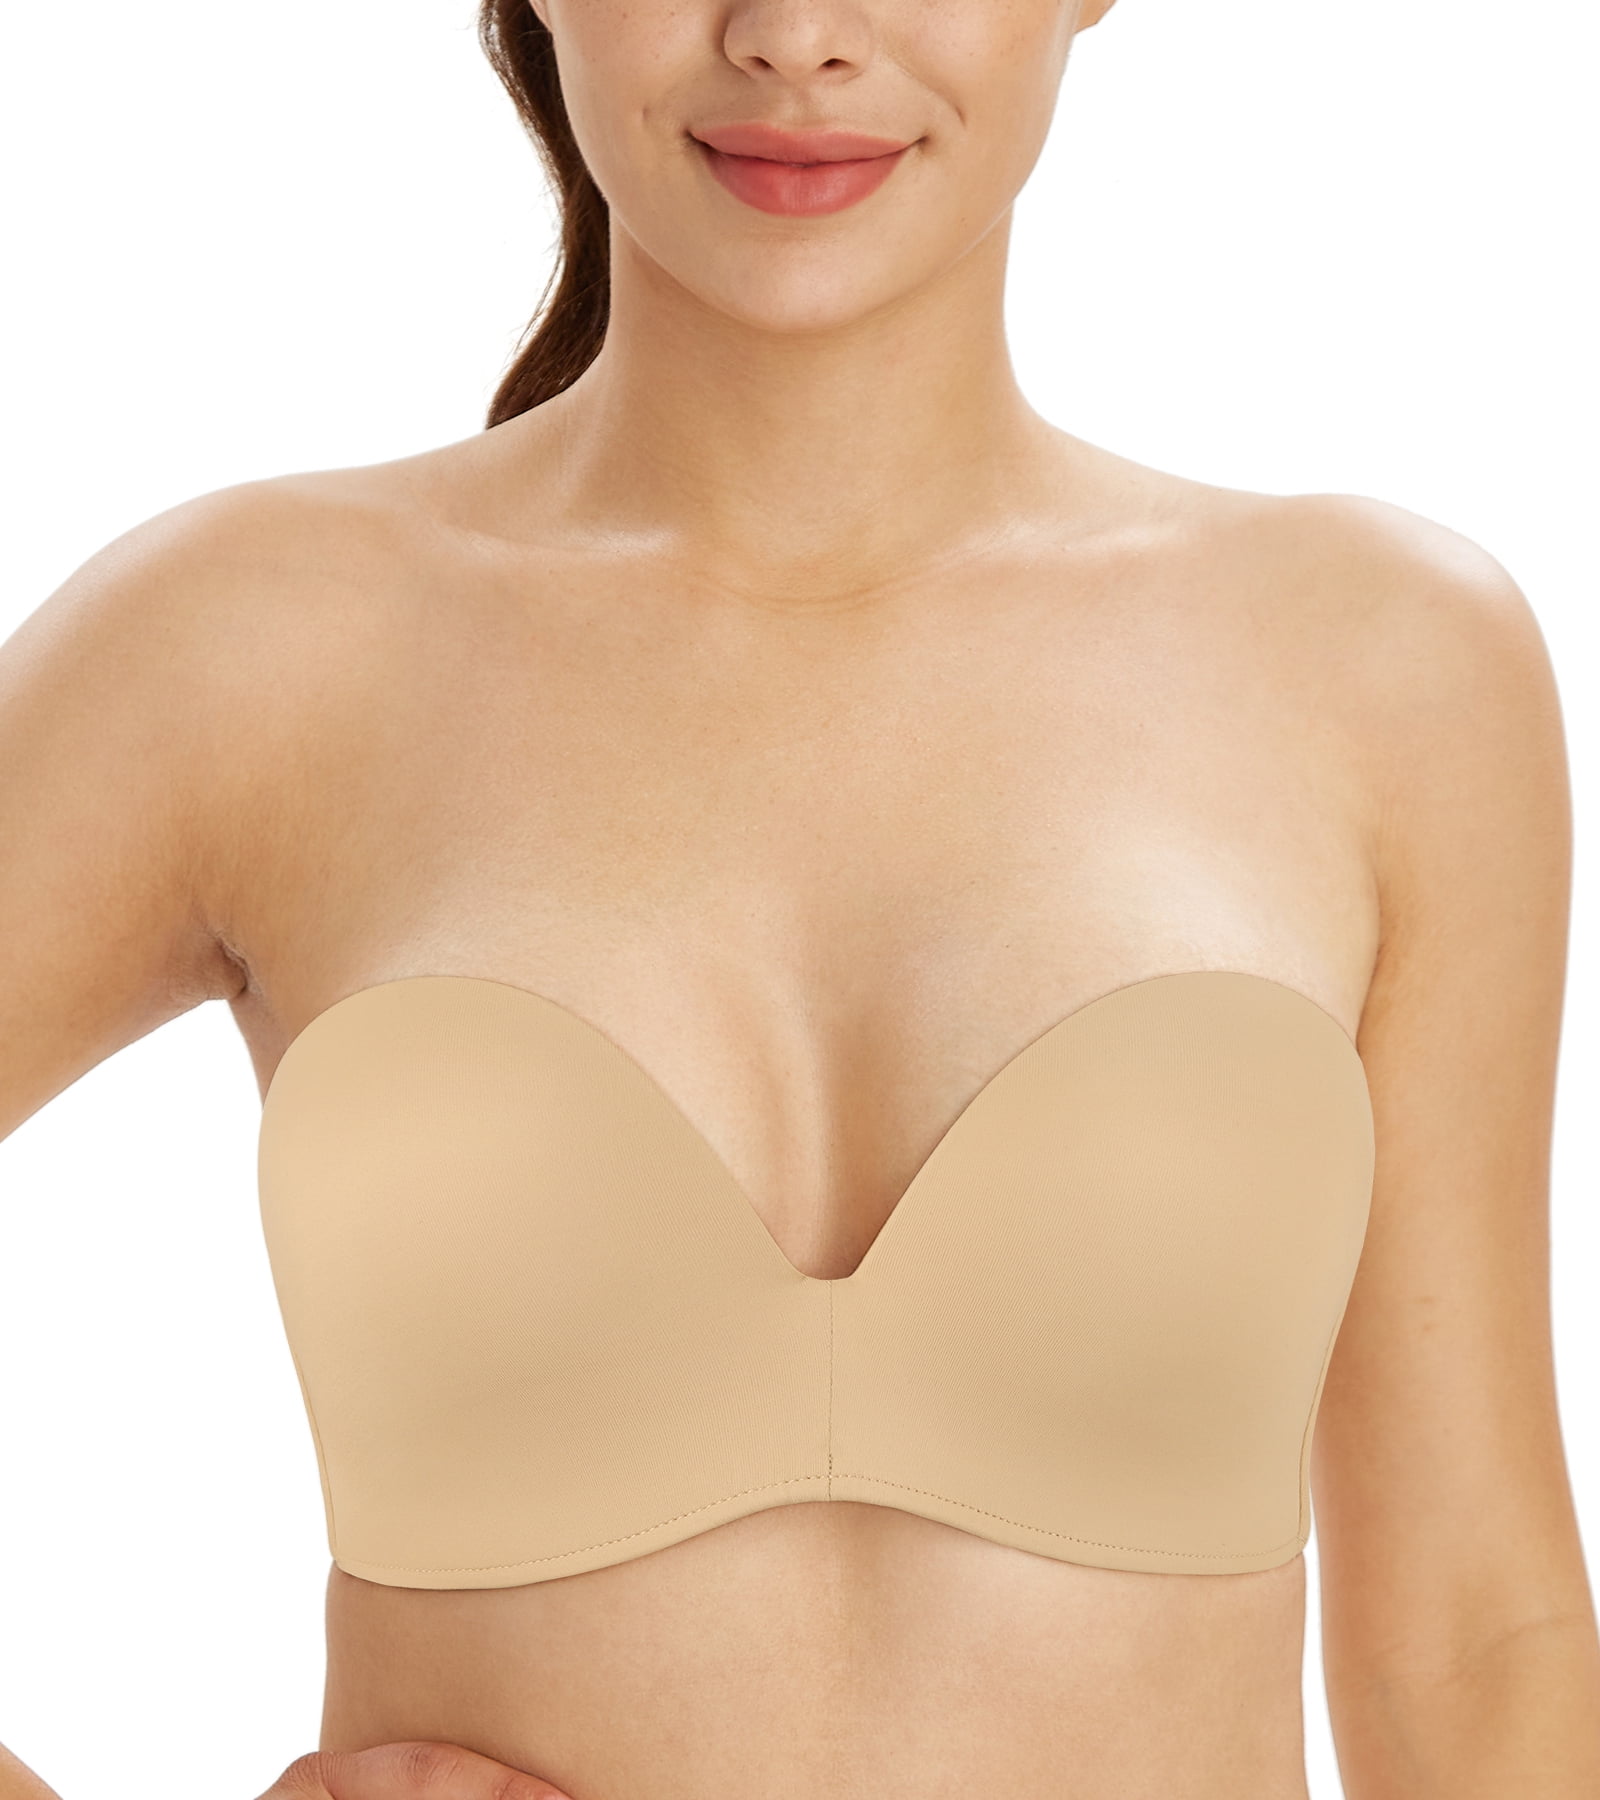 EHQJNJ Wireless Bra Strapless Bra for Women Non Slip Push up Wire Comfort  Lift and Support Anti Droop No Show Bandeau Bra Strapless Bras for Women No  underwire 